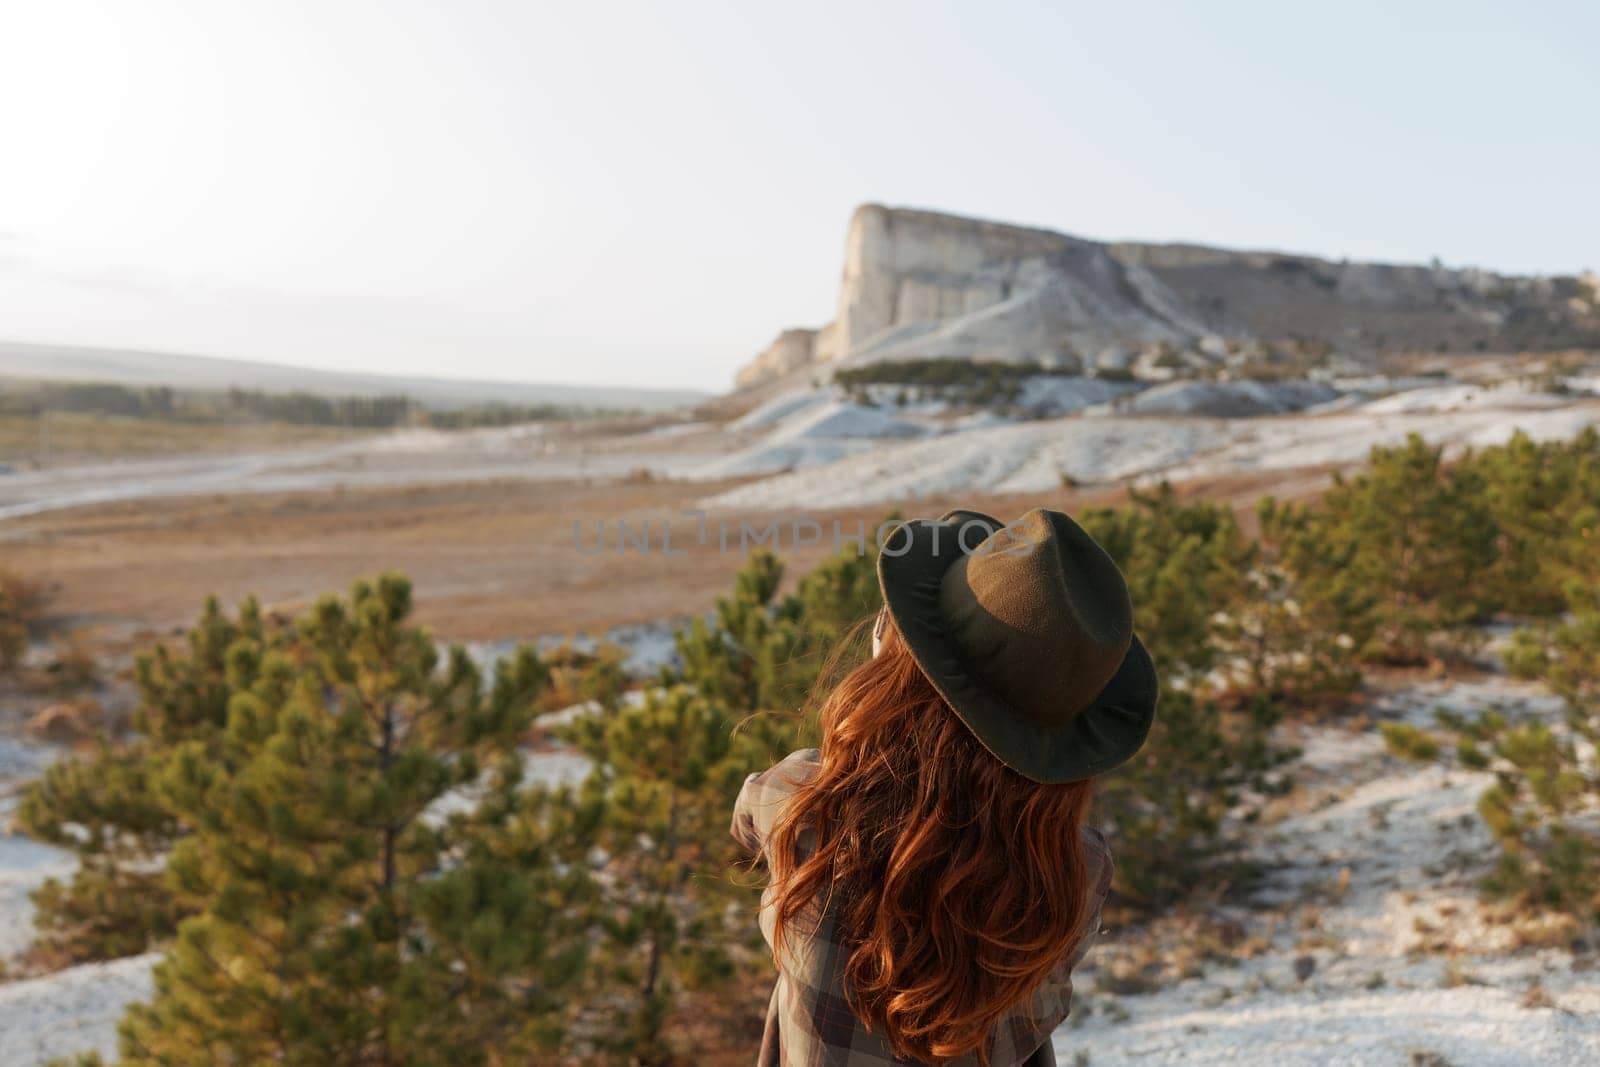 Redhaired woman in hat gazes at majestic mountain vista on horizon